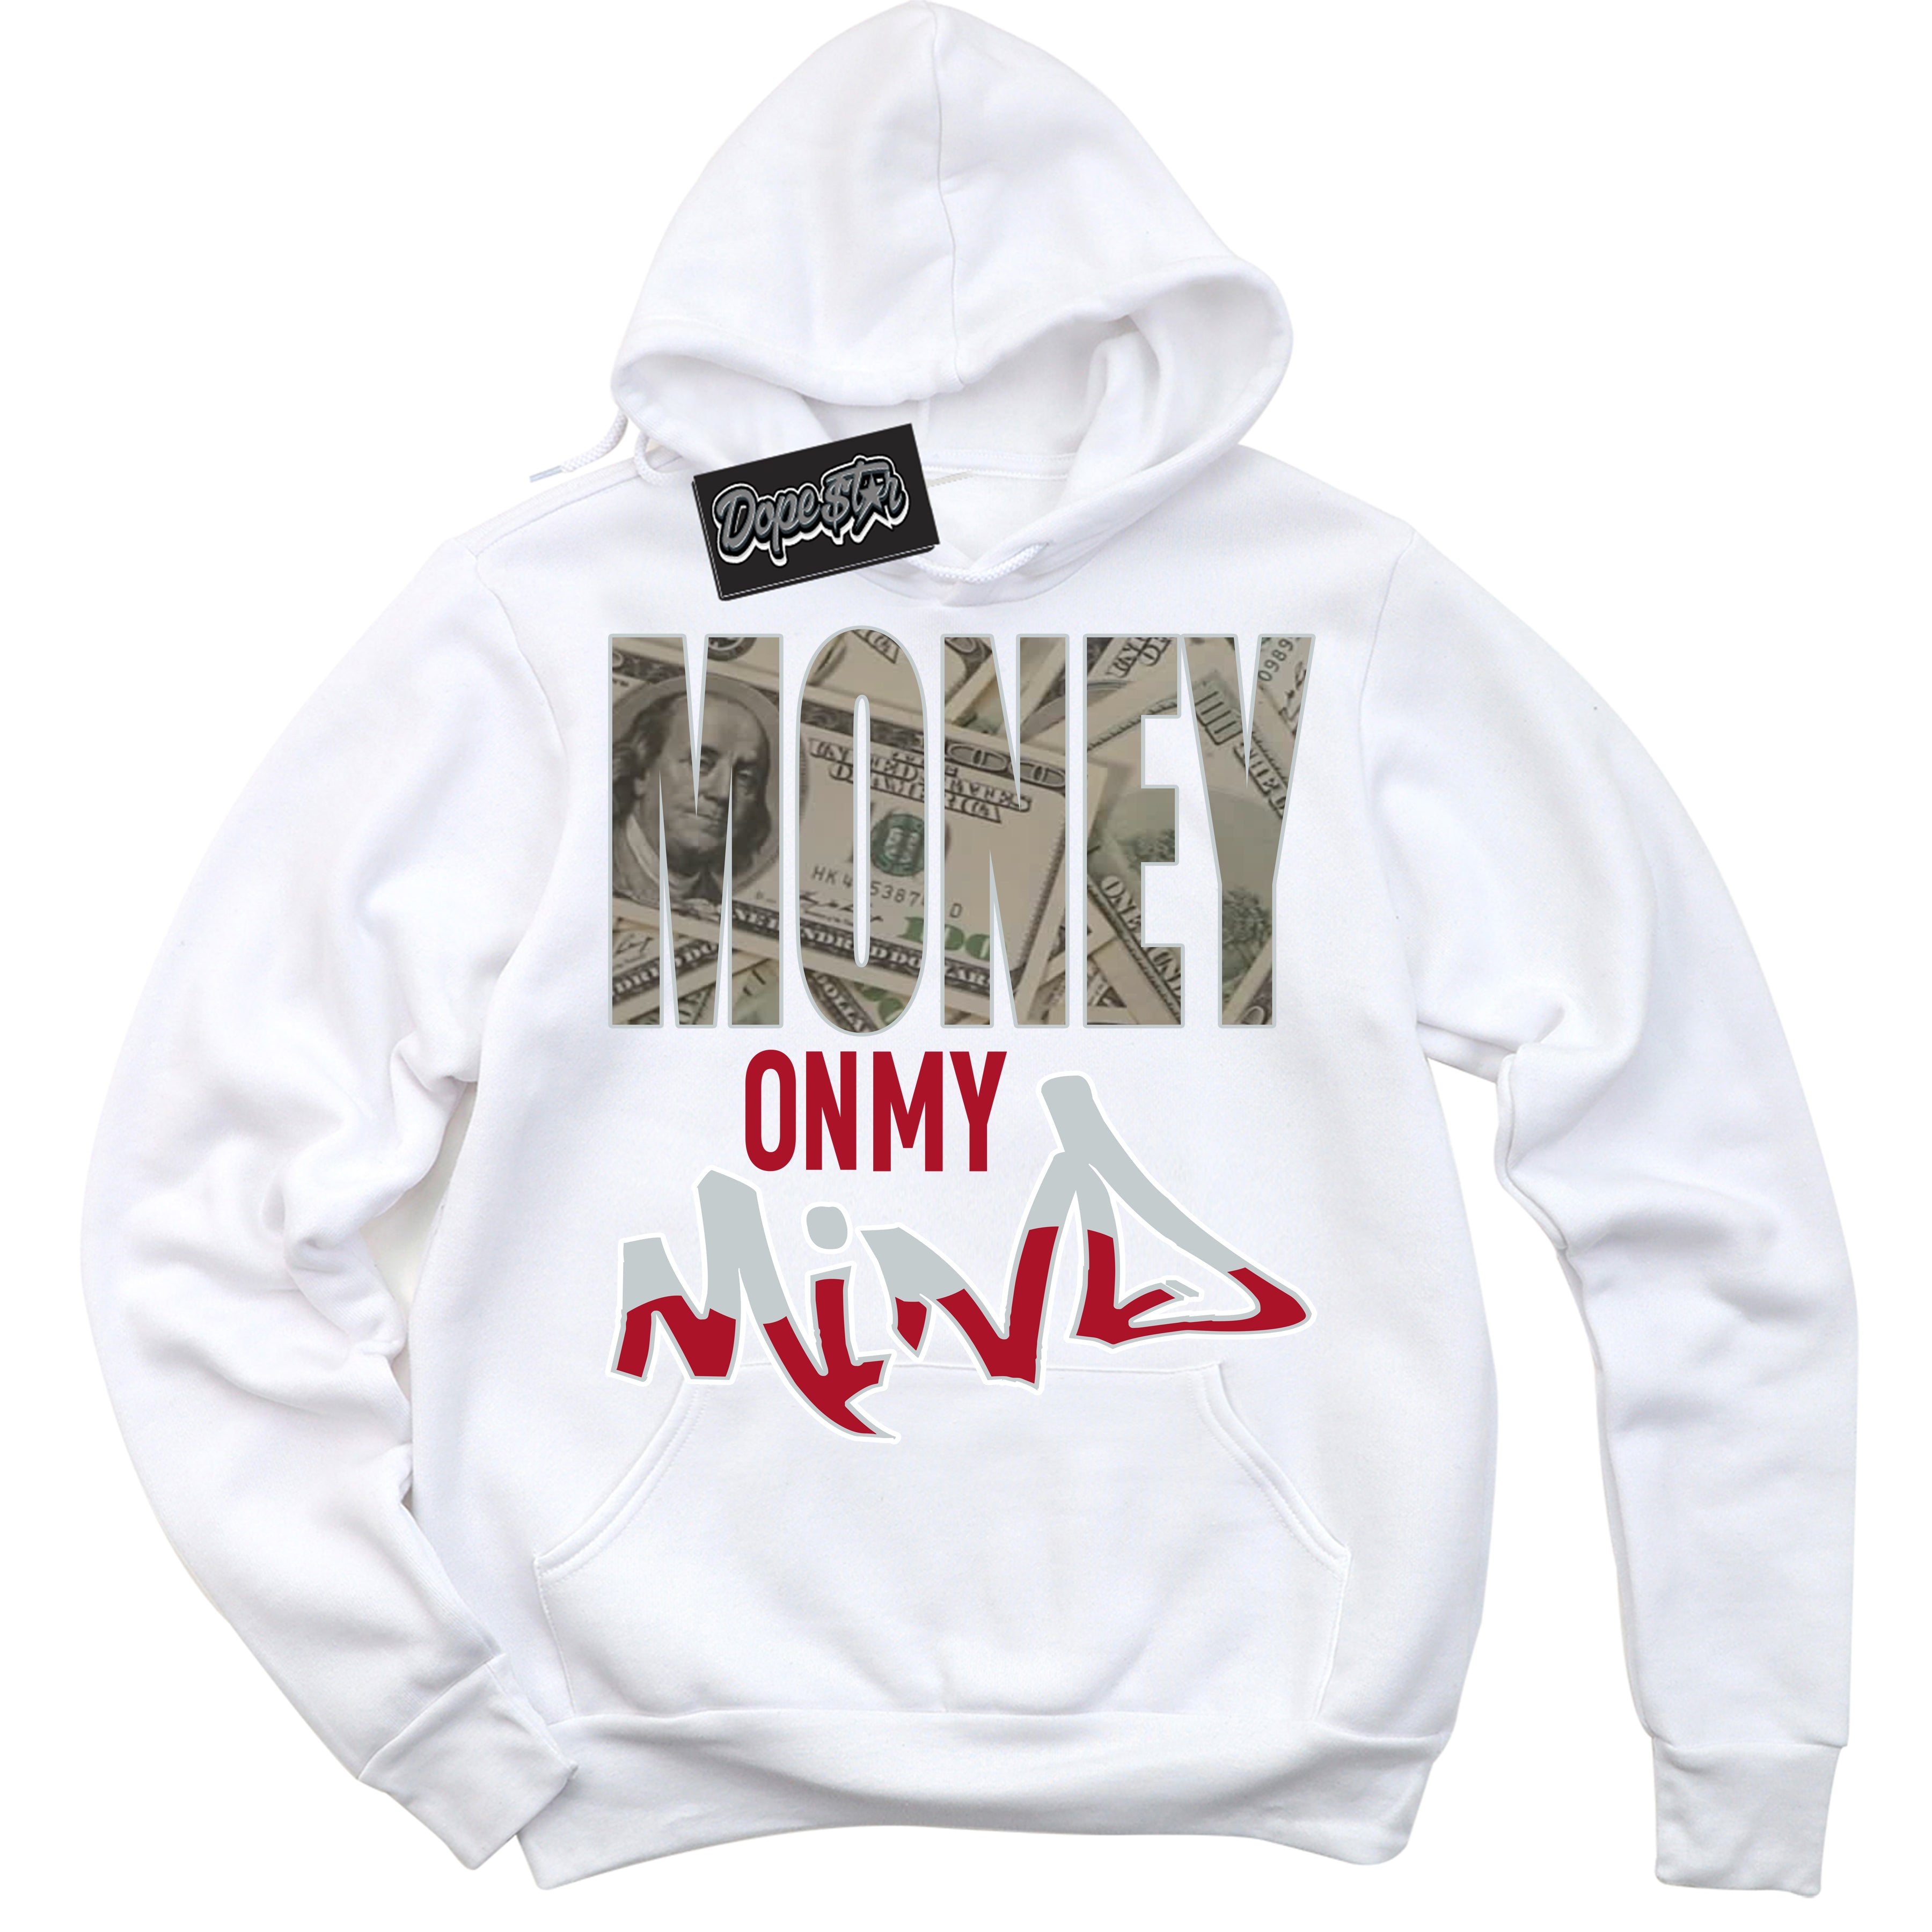 Cool Black Hoodie with “ Money On My Mind ”  design that Perfectly Matches  Reverse Ultraman Sneakers.